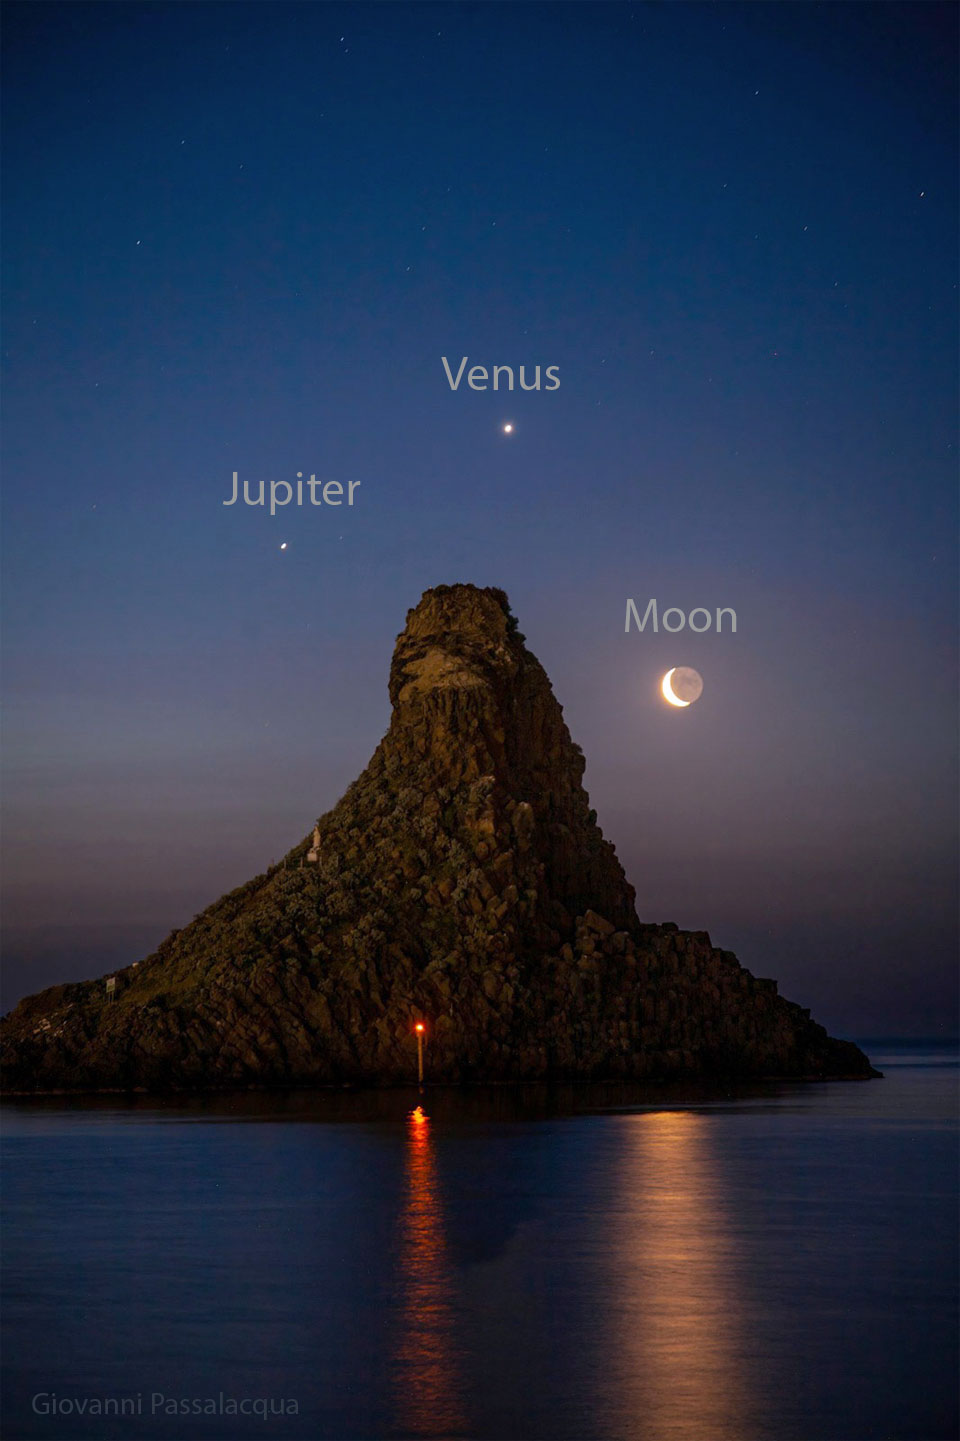 A seascape surrounds a large tree-covered hill. Surrounding the hill
in the night sky are three bright dots: the planets Jupiter, Venus,
and a crescent Moon.
Please see the explanation for more detailed information.